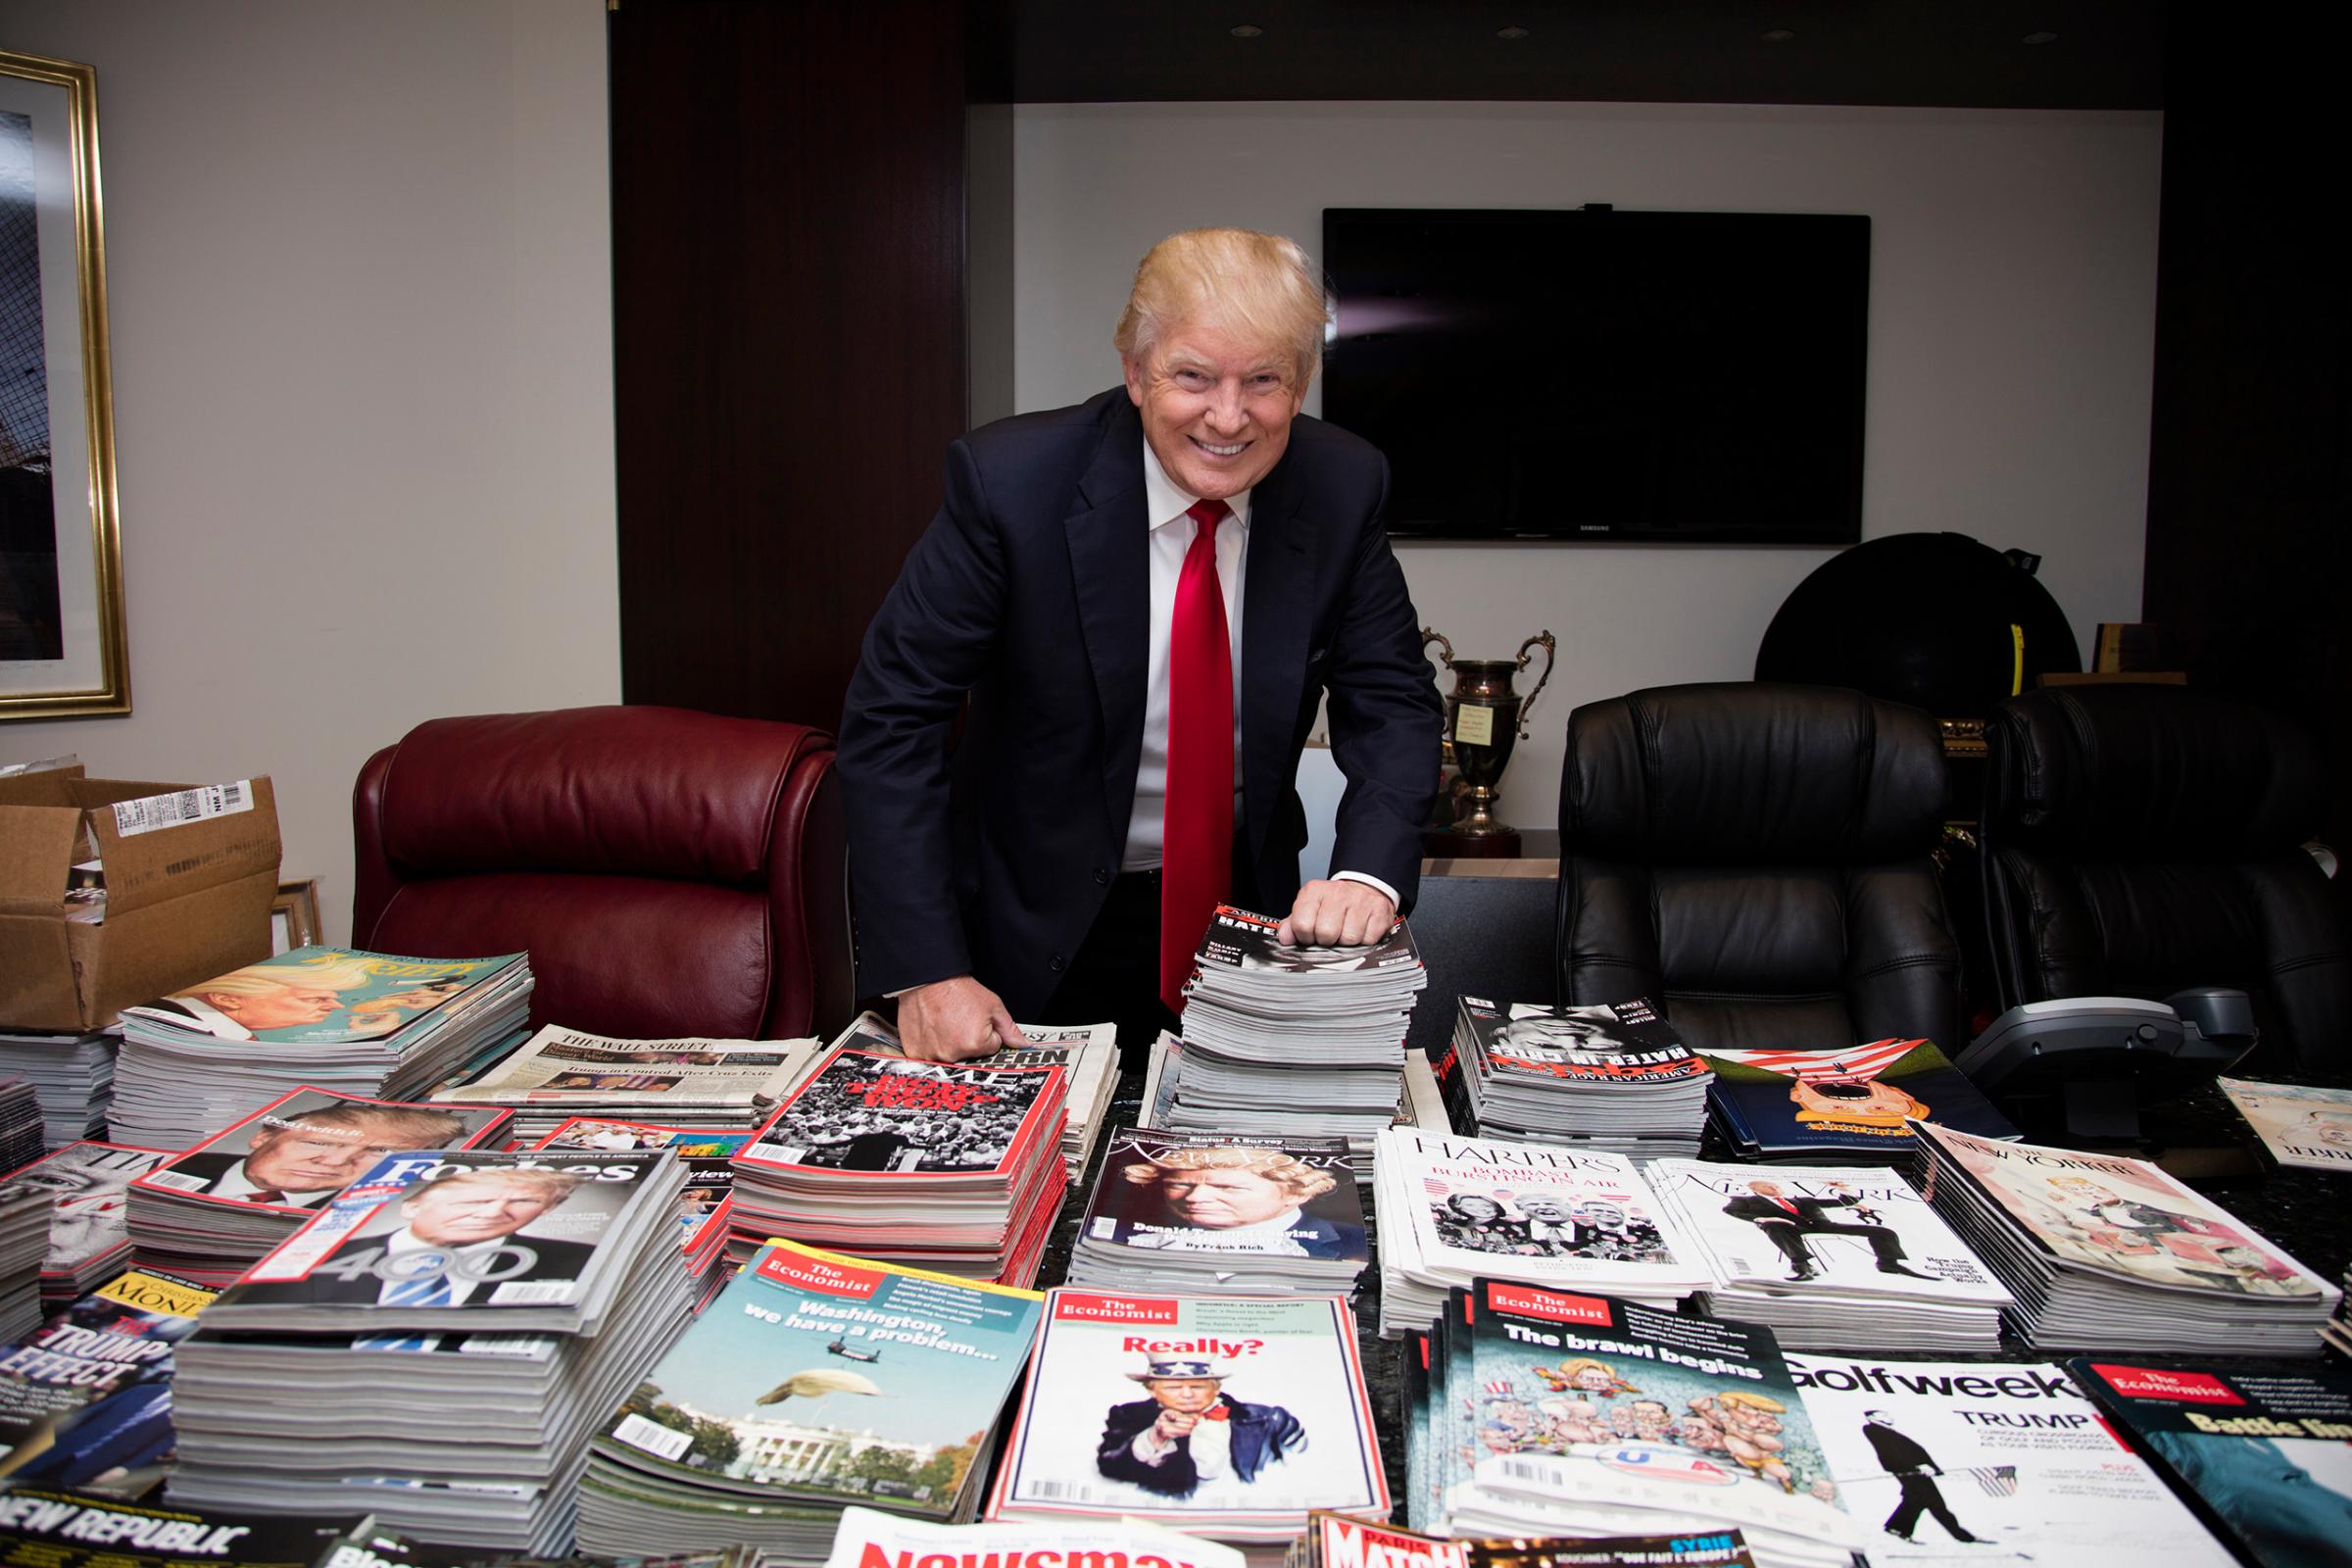 Donald Trump in a conference room, where he's storing his archive of press and memorabilia, on July 11, 2016.